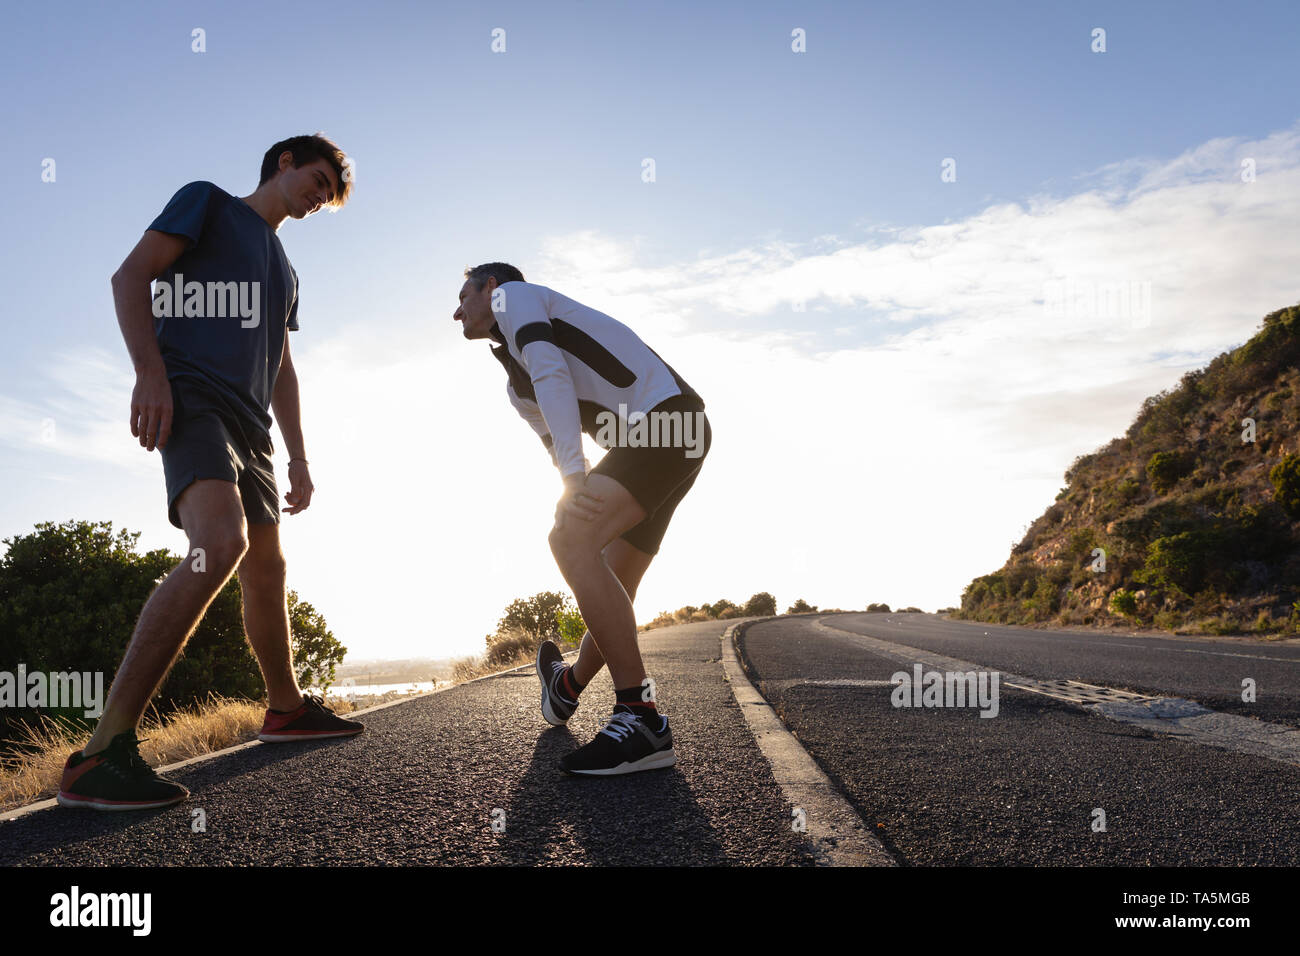 Father and son doing stretching exercise on road Stock Photo